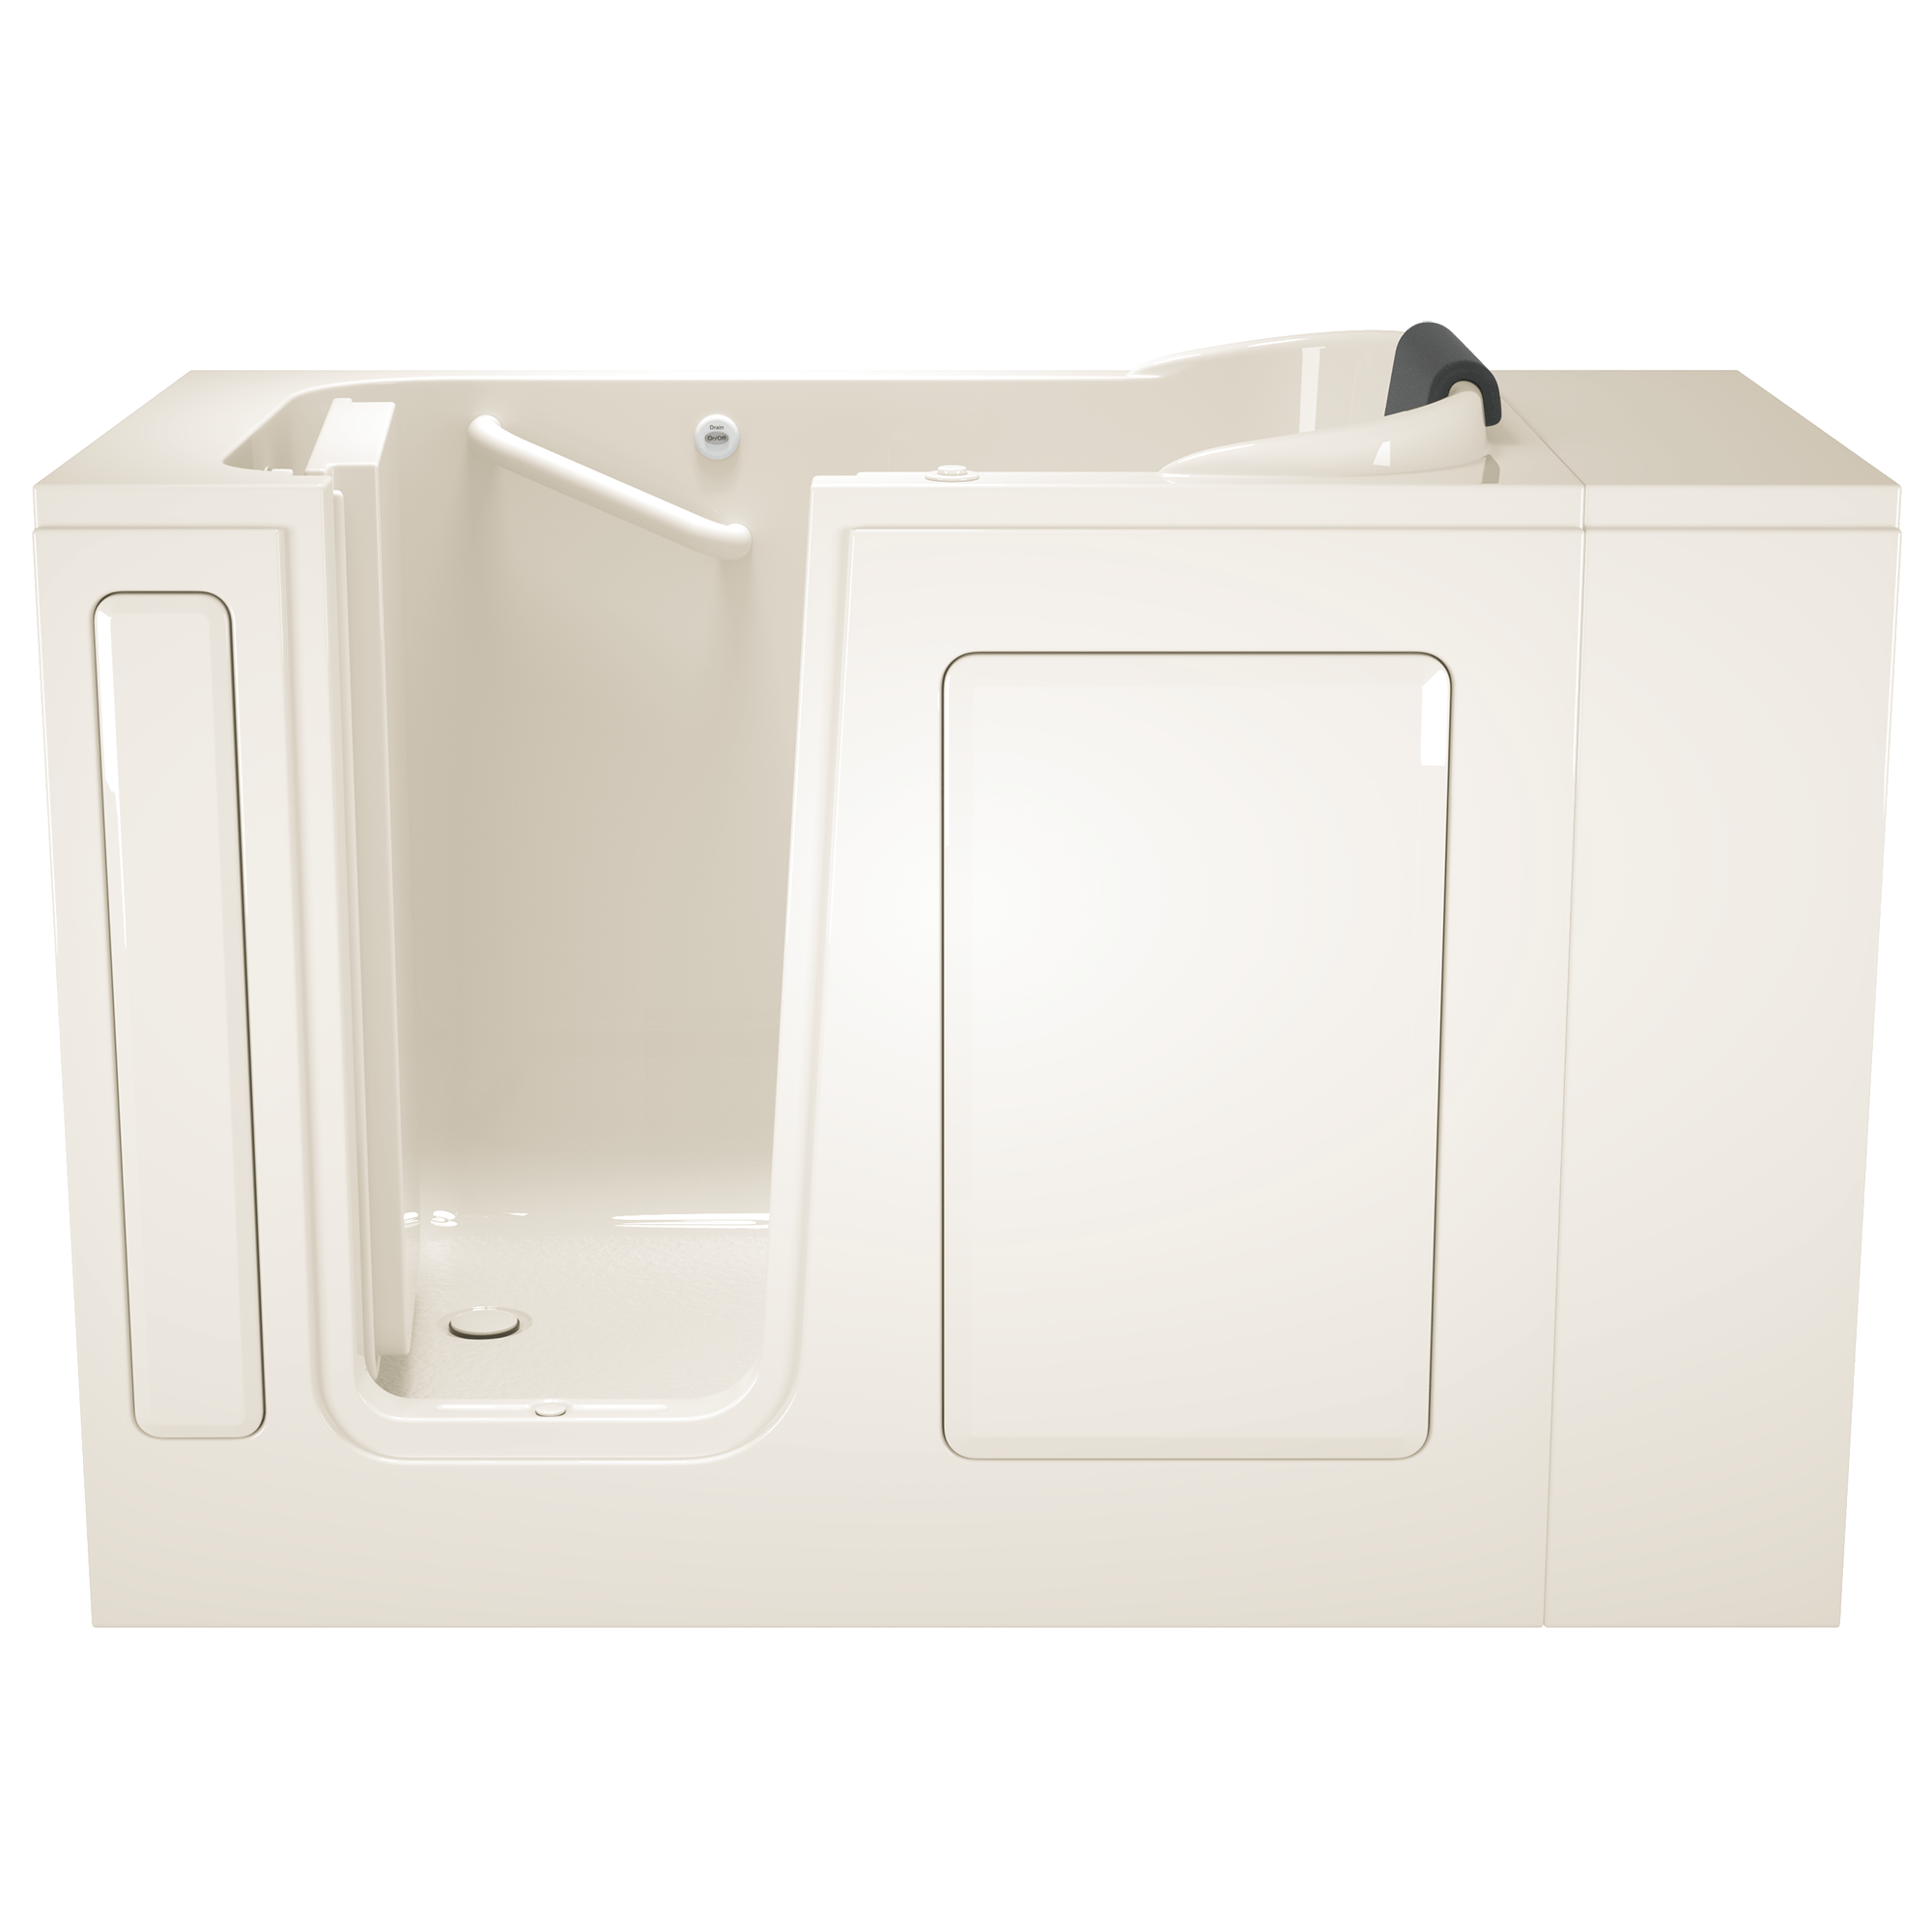 Gelcoat Premium Series 28 x 48 Inch Walk in Tub With Whirlpool System   Left Hand Drain WIB LINEN